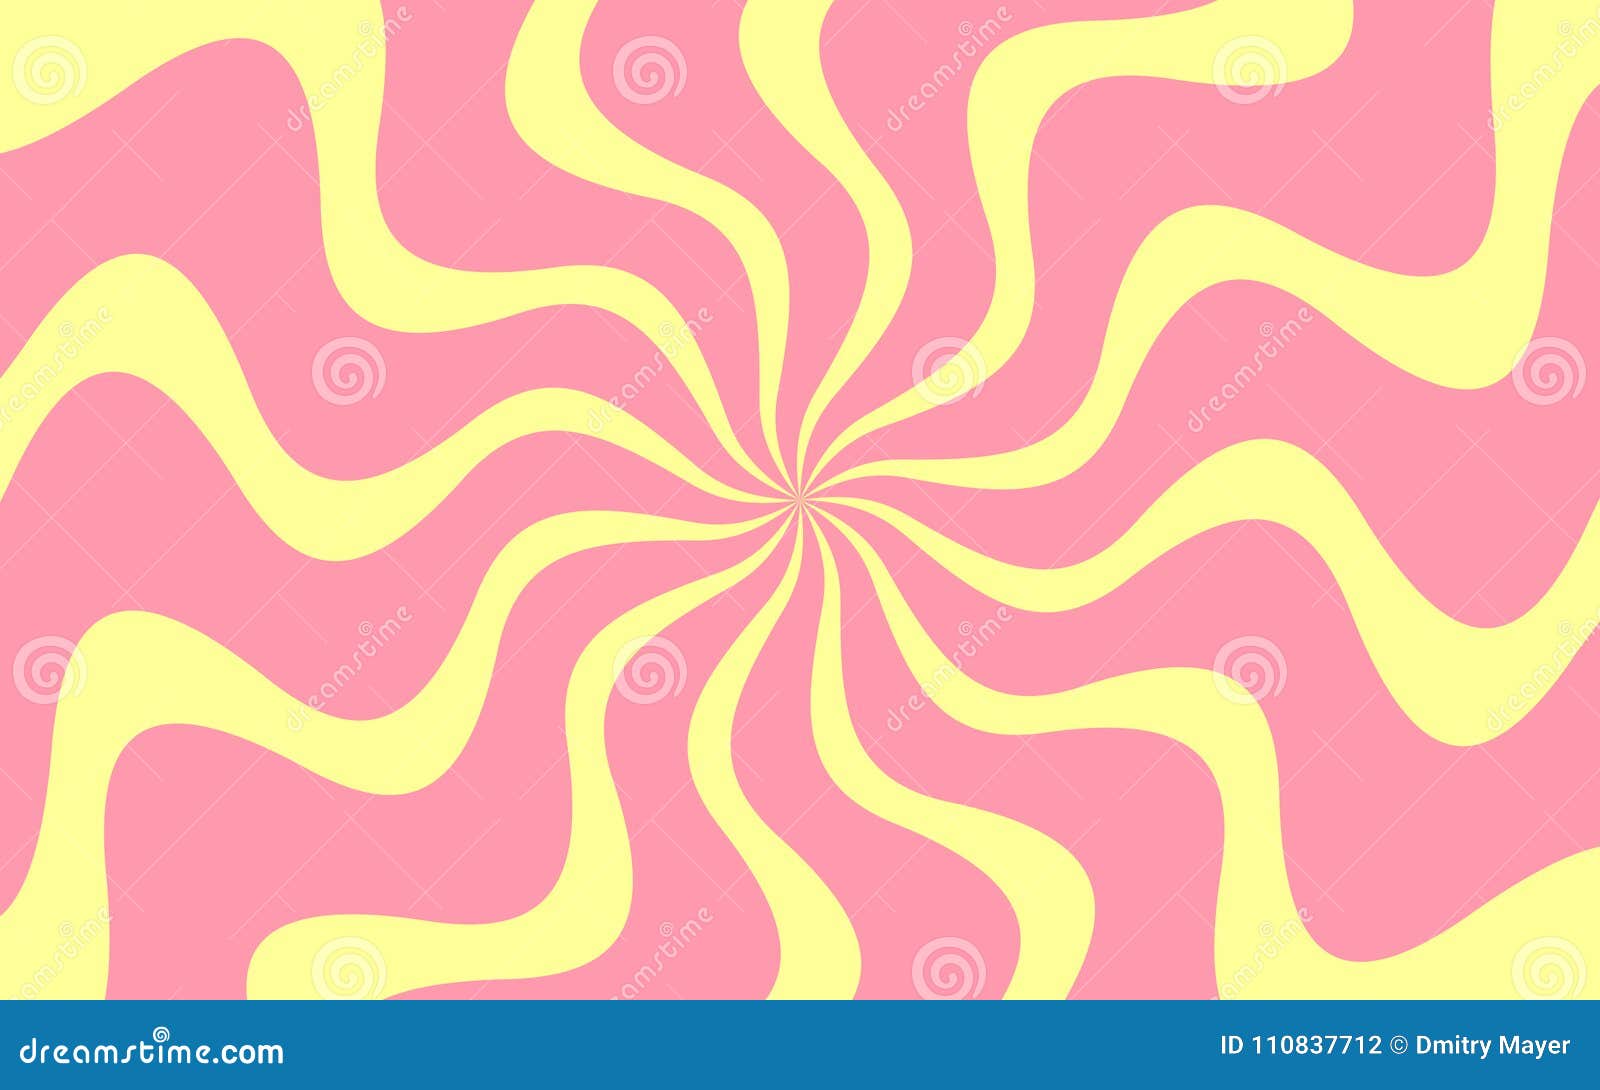 Vector Background with Wavy Lines Stock Vector - Illustration of cover ...